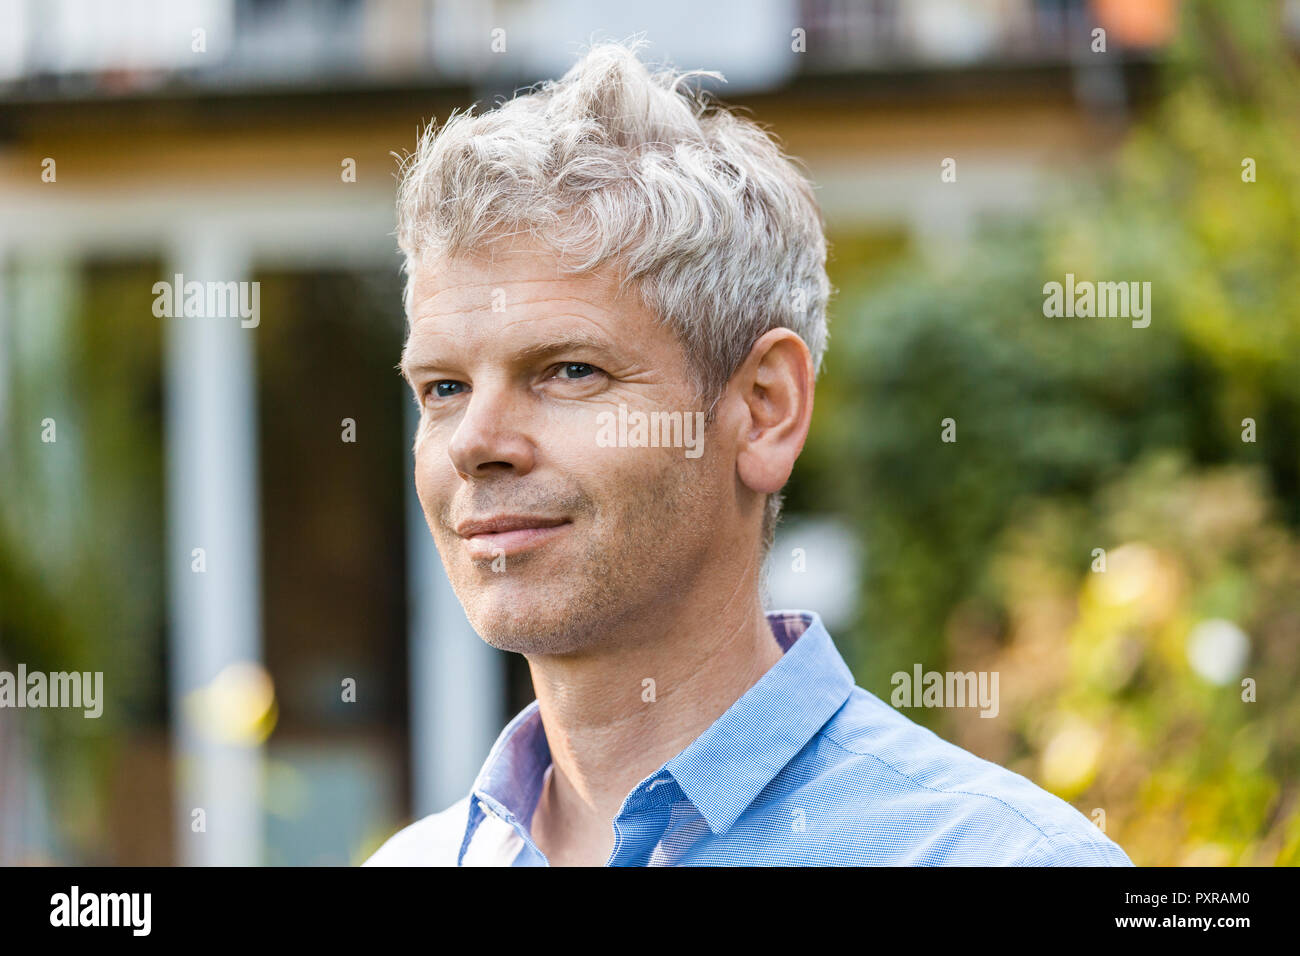 Portrait of smiling mature man with Stock Photo